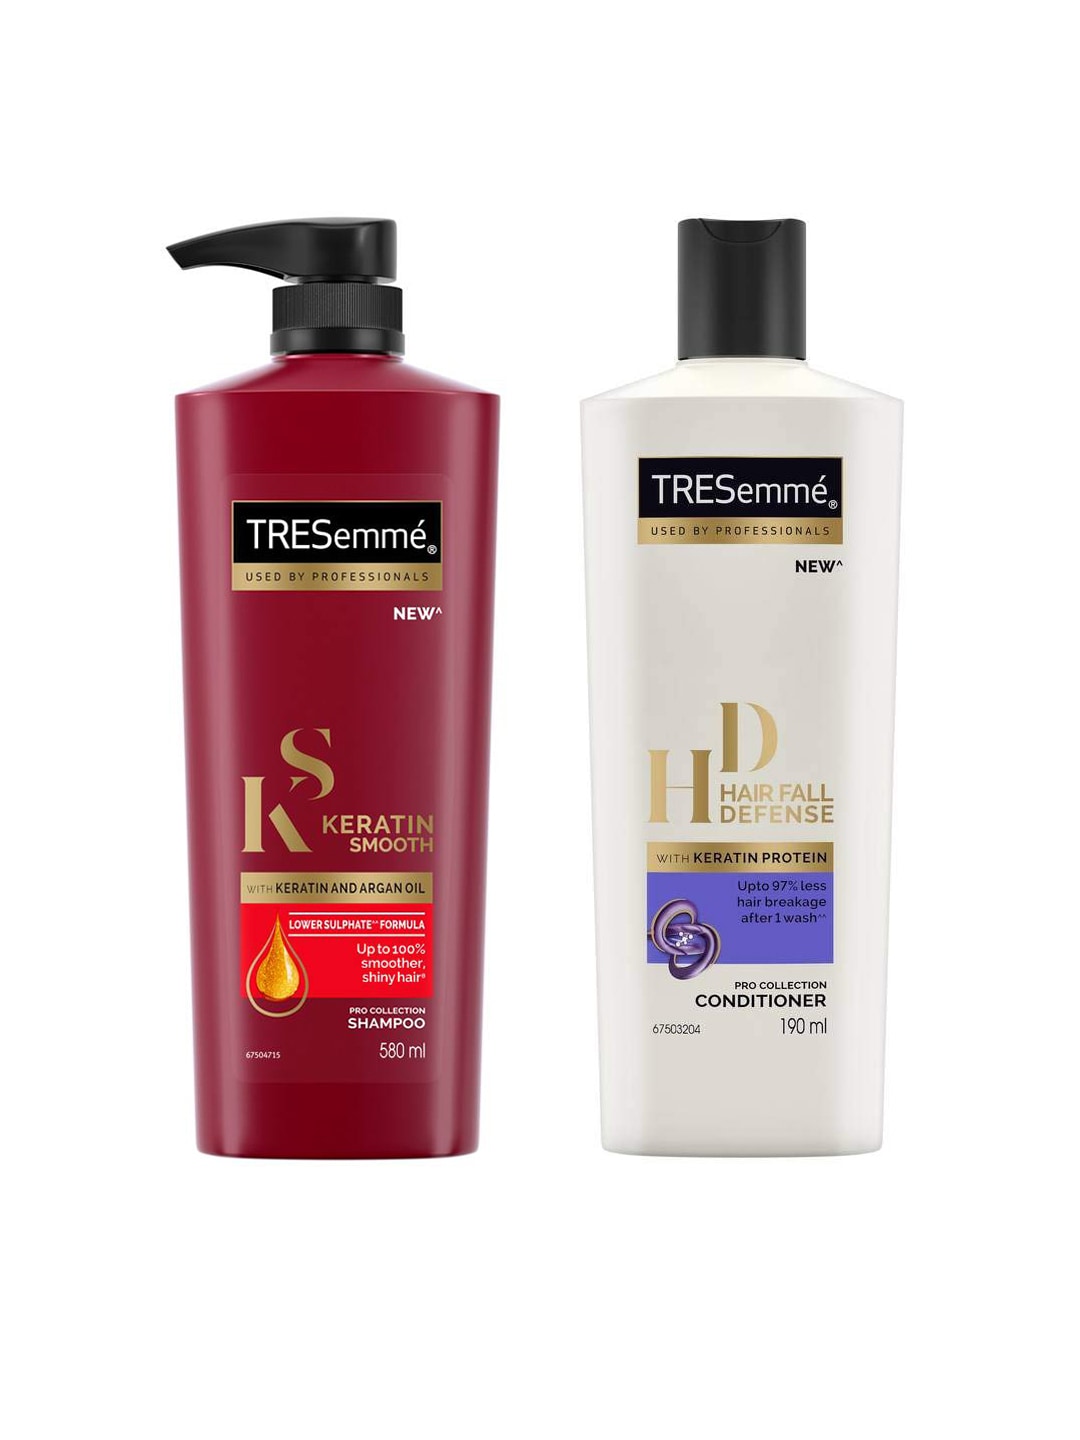 TRESemme Set of Keratin Smooth Shampoo & Hair Fall Defense Conditioner Price in India